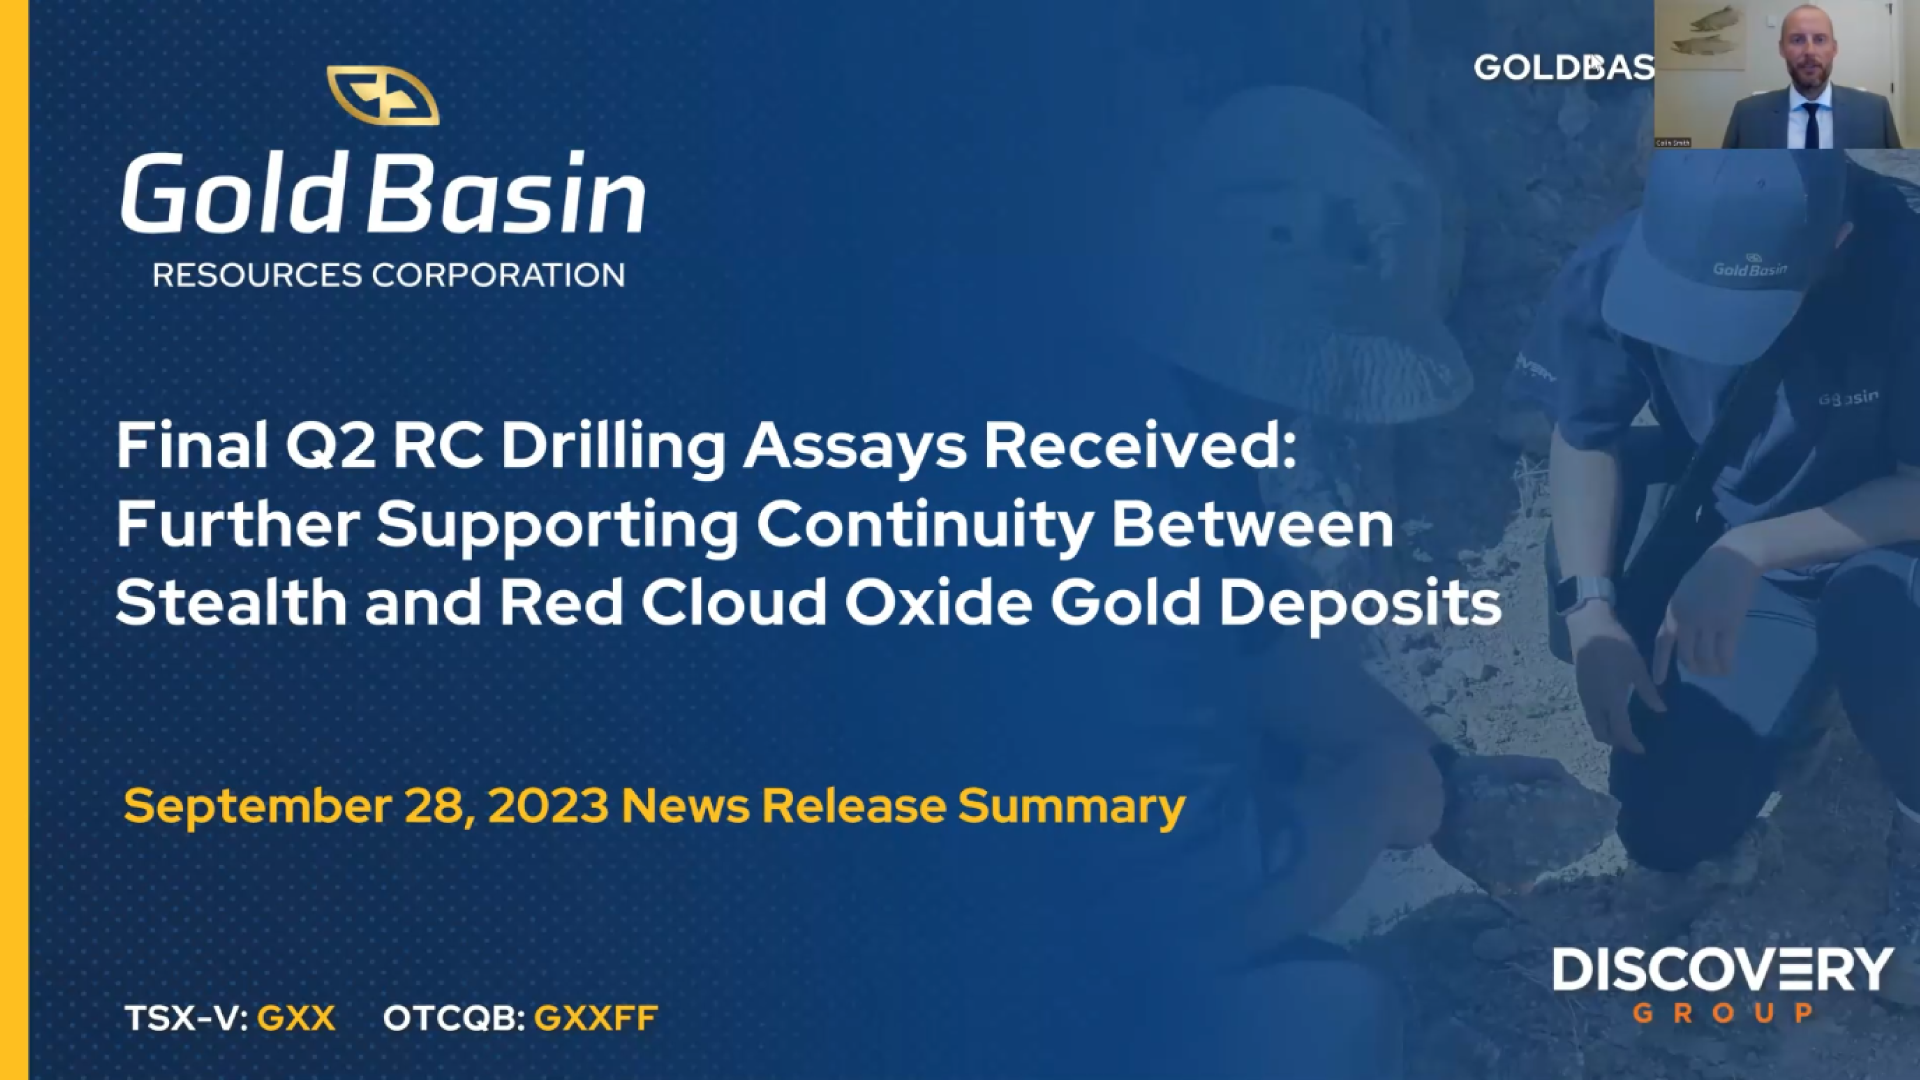 Q2 RC Drilling: Further Supporting Continuity Between Stealth and Red Cloud Oxide Gold Deposits